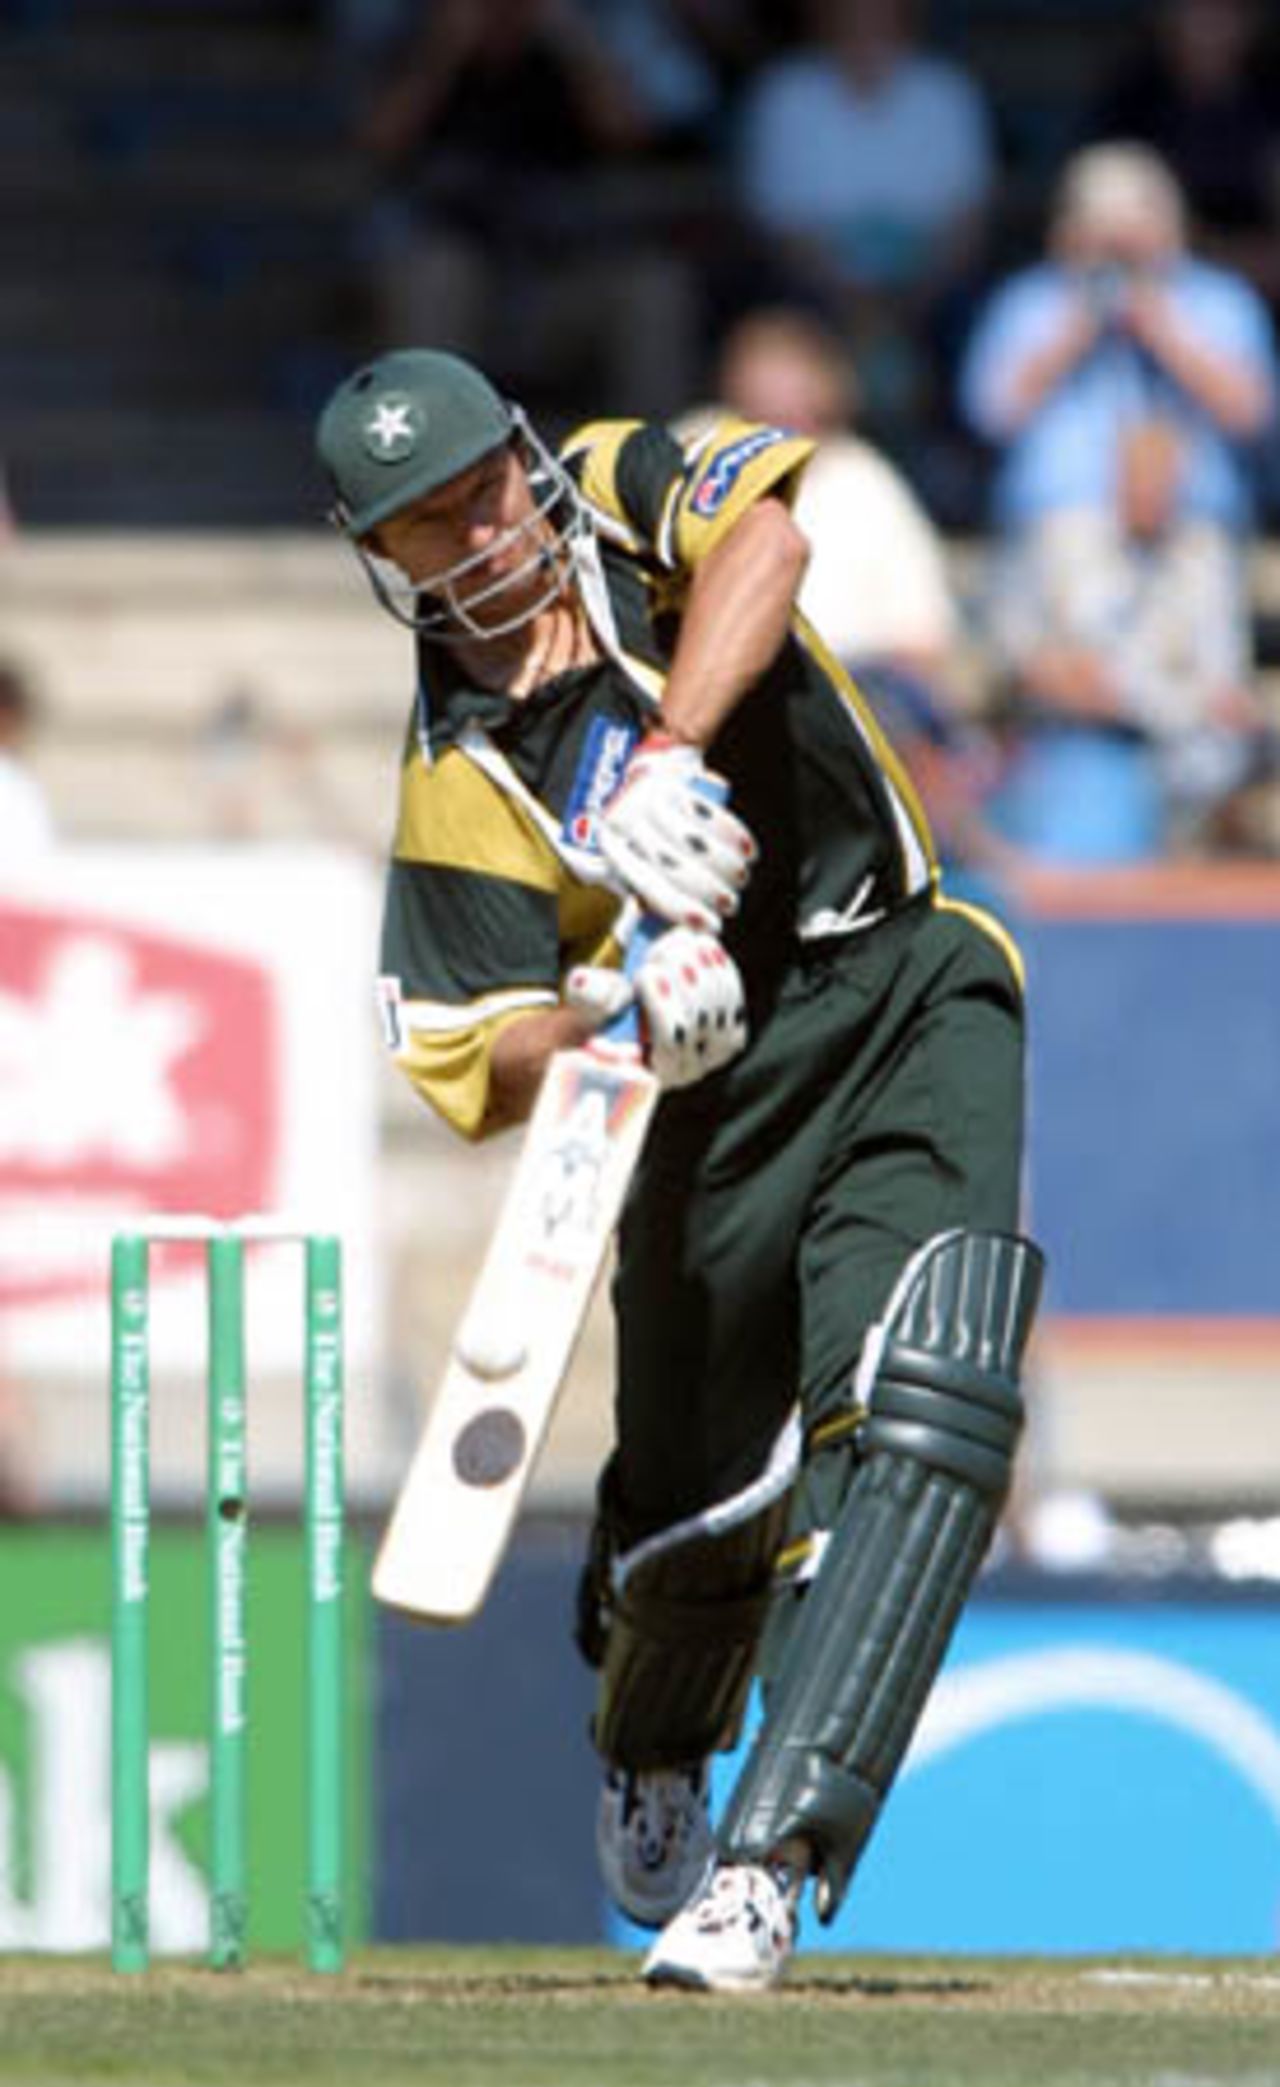 Pakistan opening batsman Shahid Afridi prepares to hit a ball over mid off during his innings of 65. 5th One-Day International: New Zealand v Pakistan, Carisbrook, Dunedin, 28 February 2001.